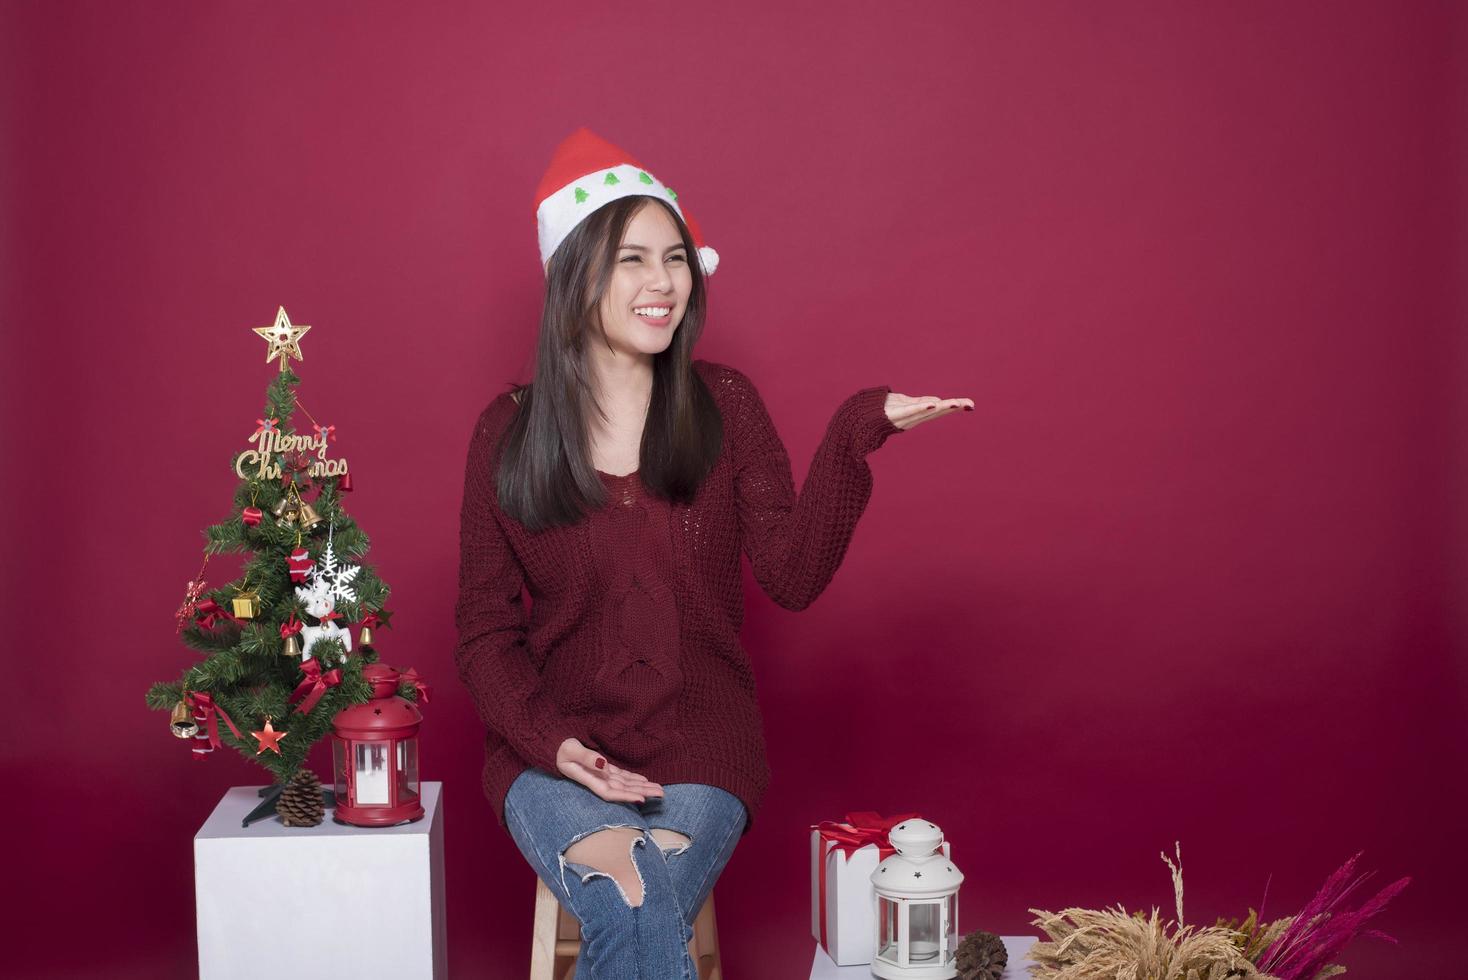 Beautiful Santa Claus girl in studio on red background, Christmas concept photo